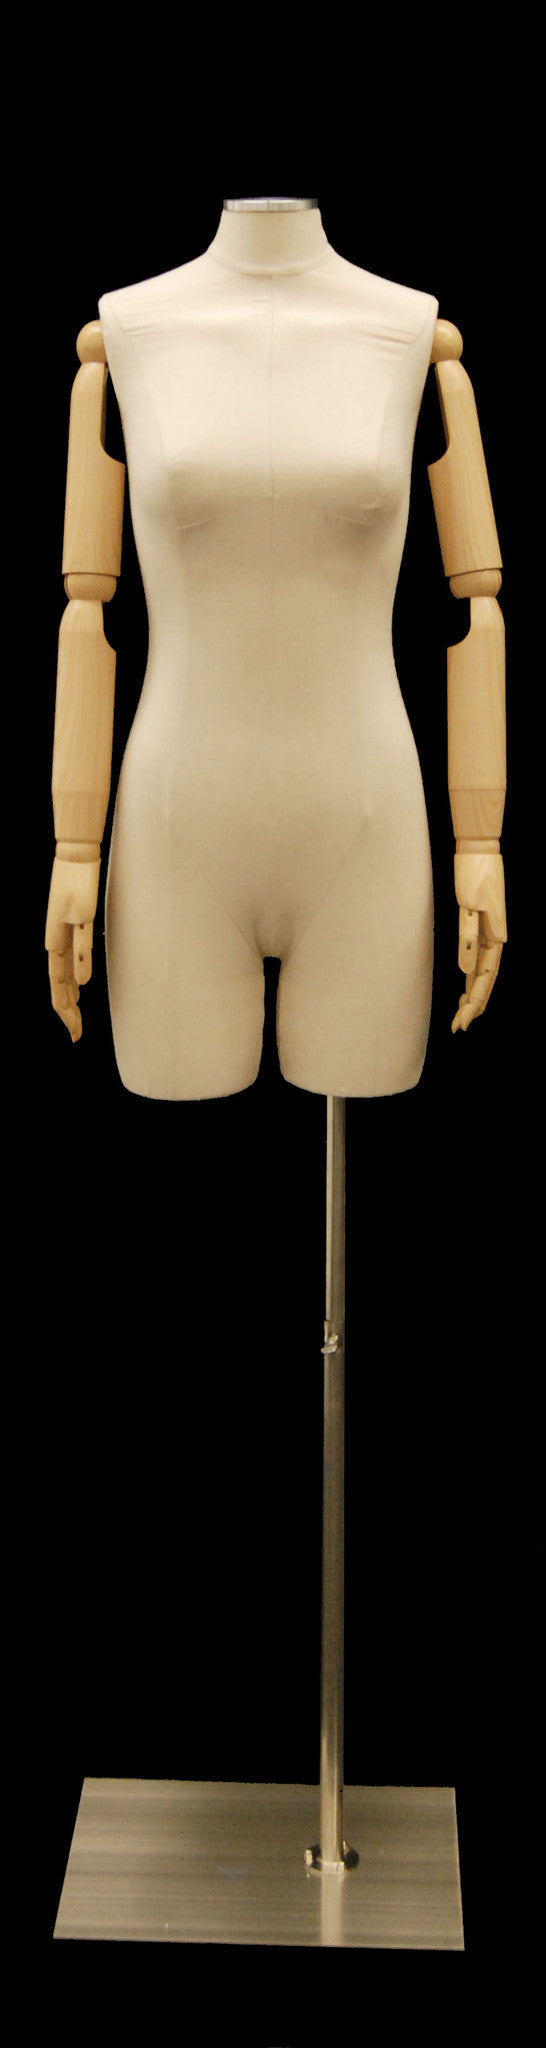 Female Half-Leg Dress Form with Bendable Arms: Natural Linen